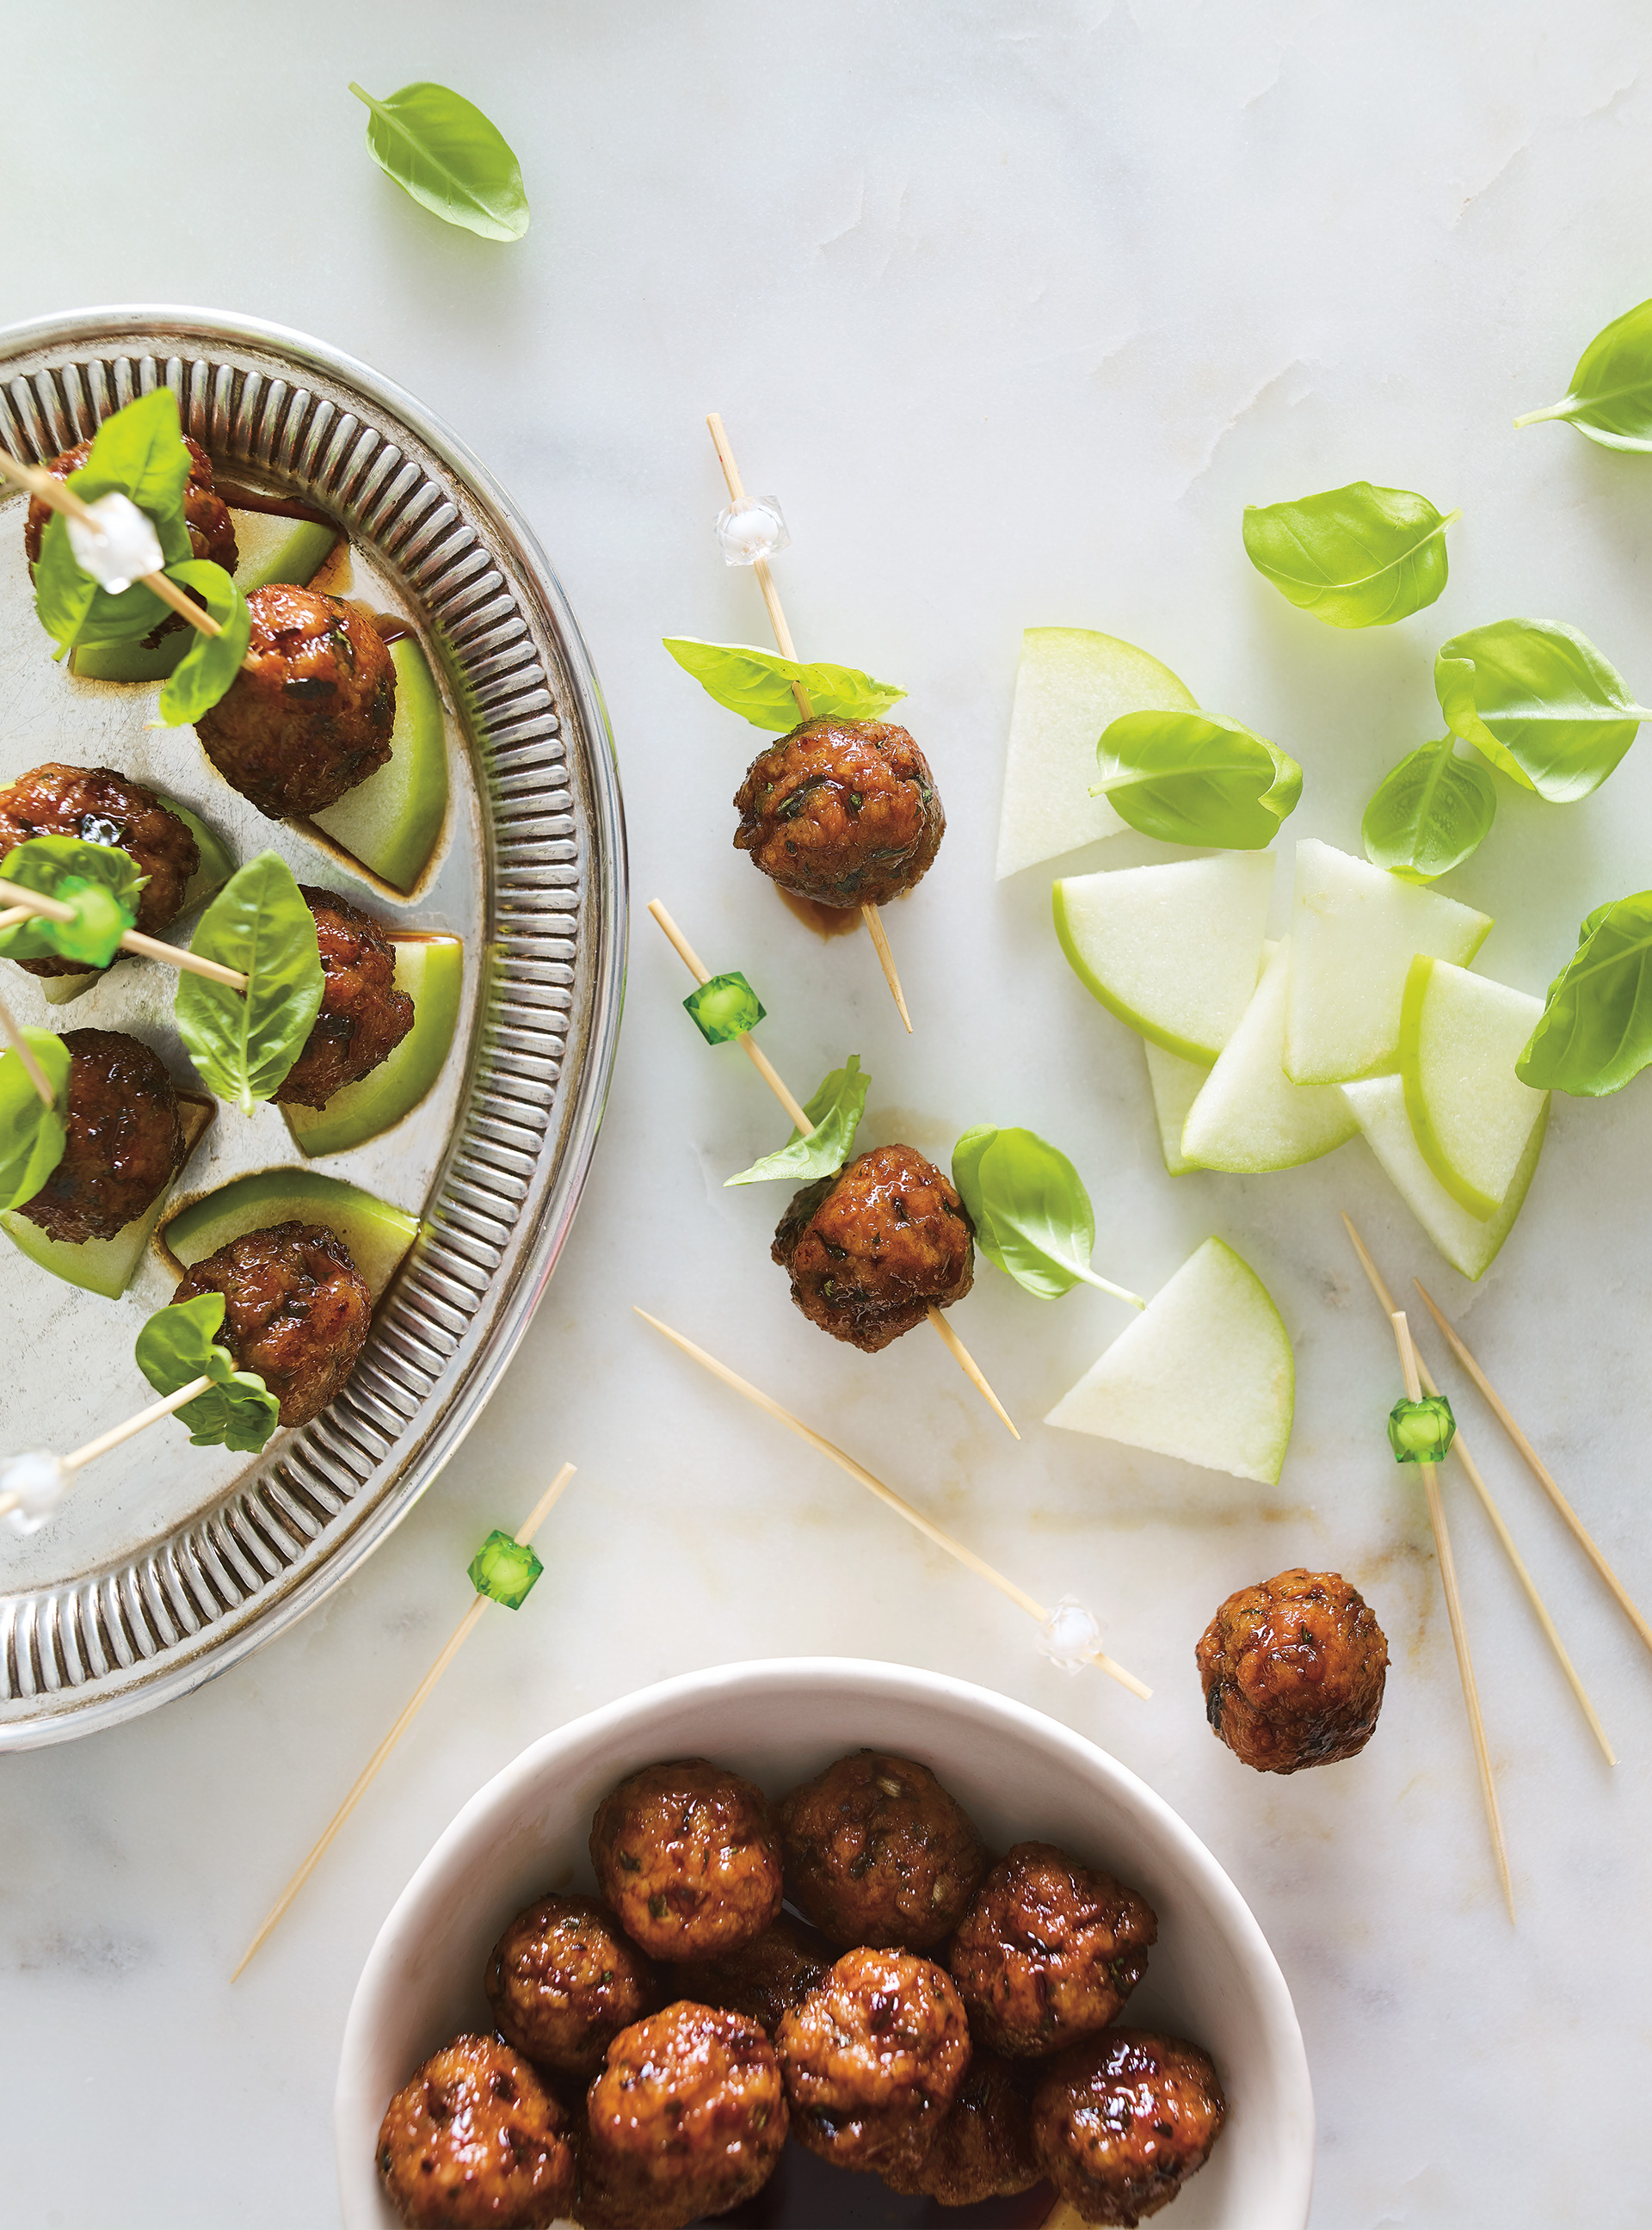 Glazed Meatballs with Green Apple and Basil